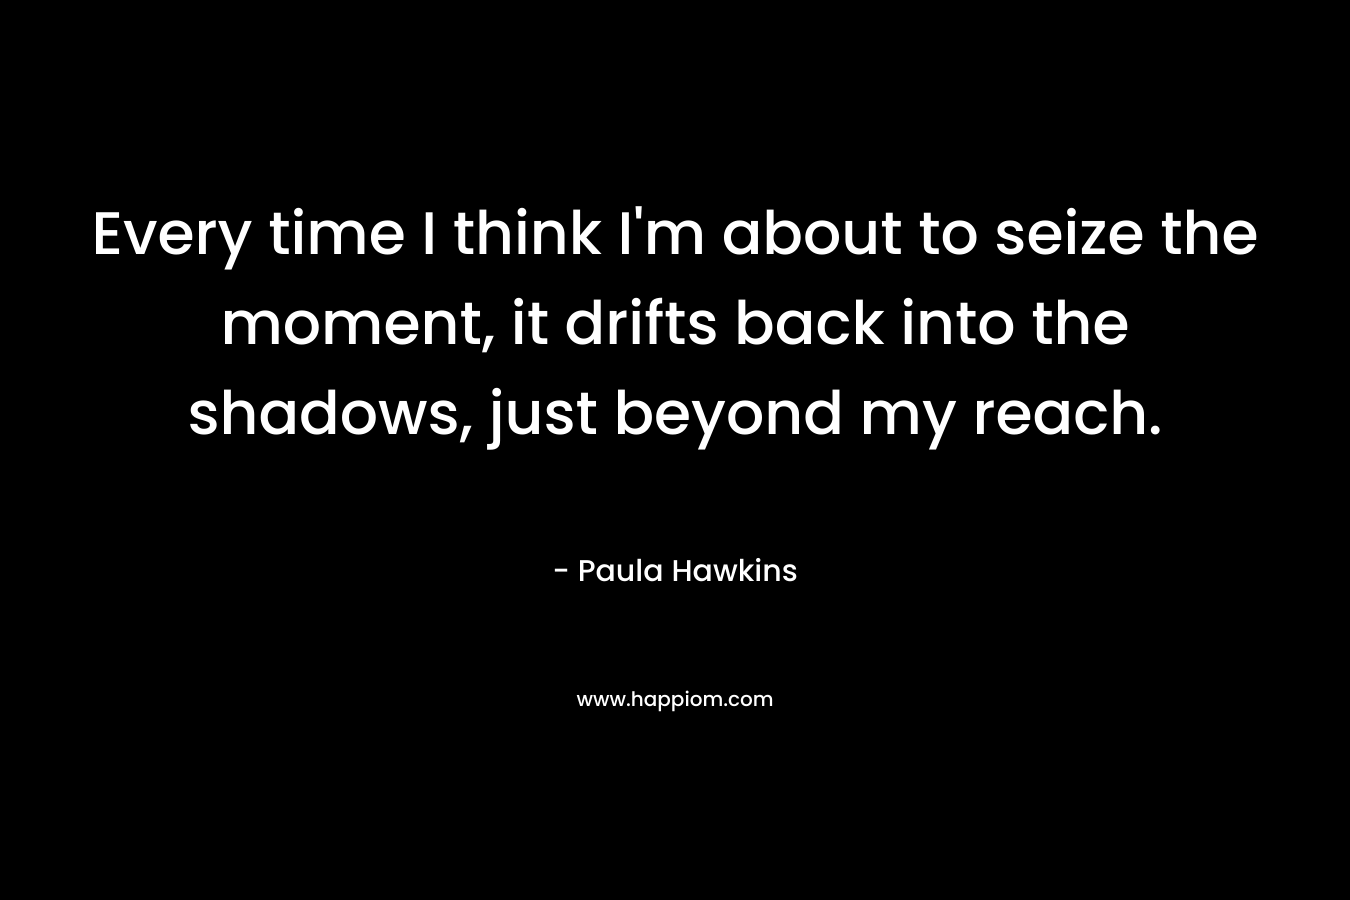 Every time I think I’m about to seize the moment, it drifts back into the shadows, just beyond my reach. – Paula Hawkins